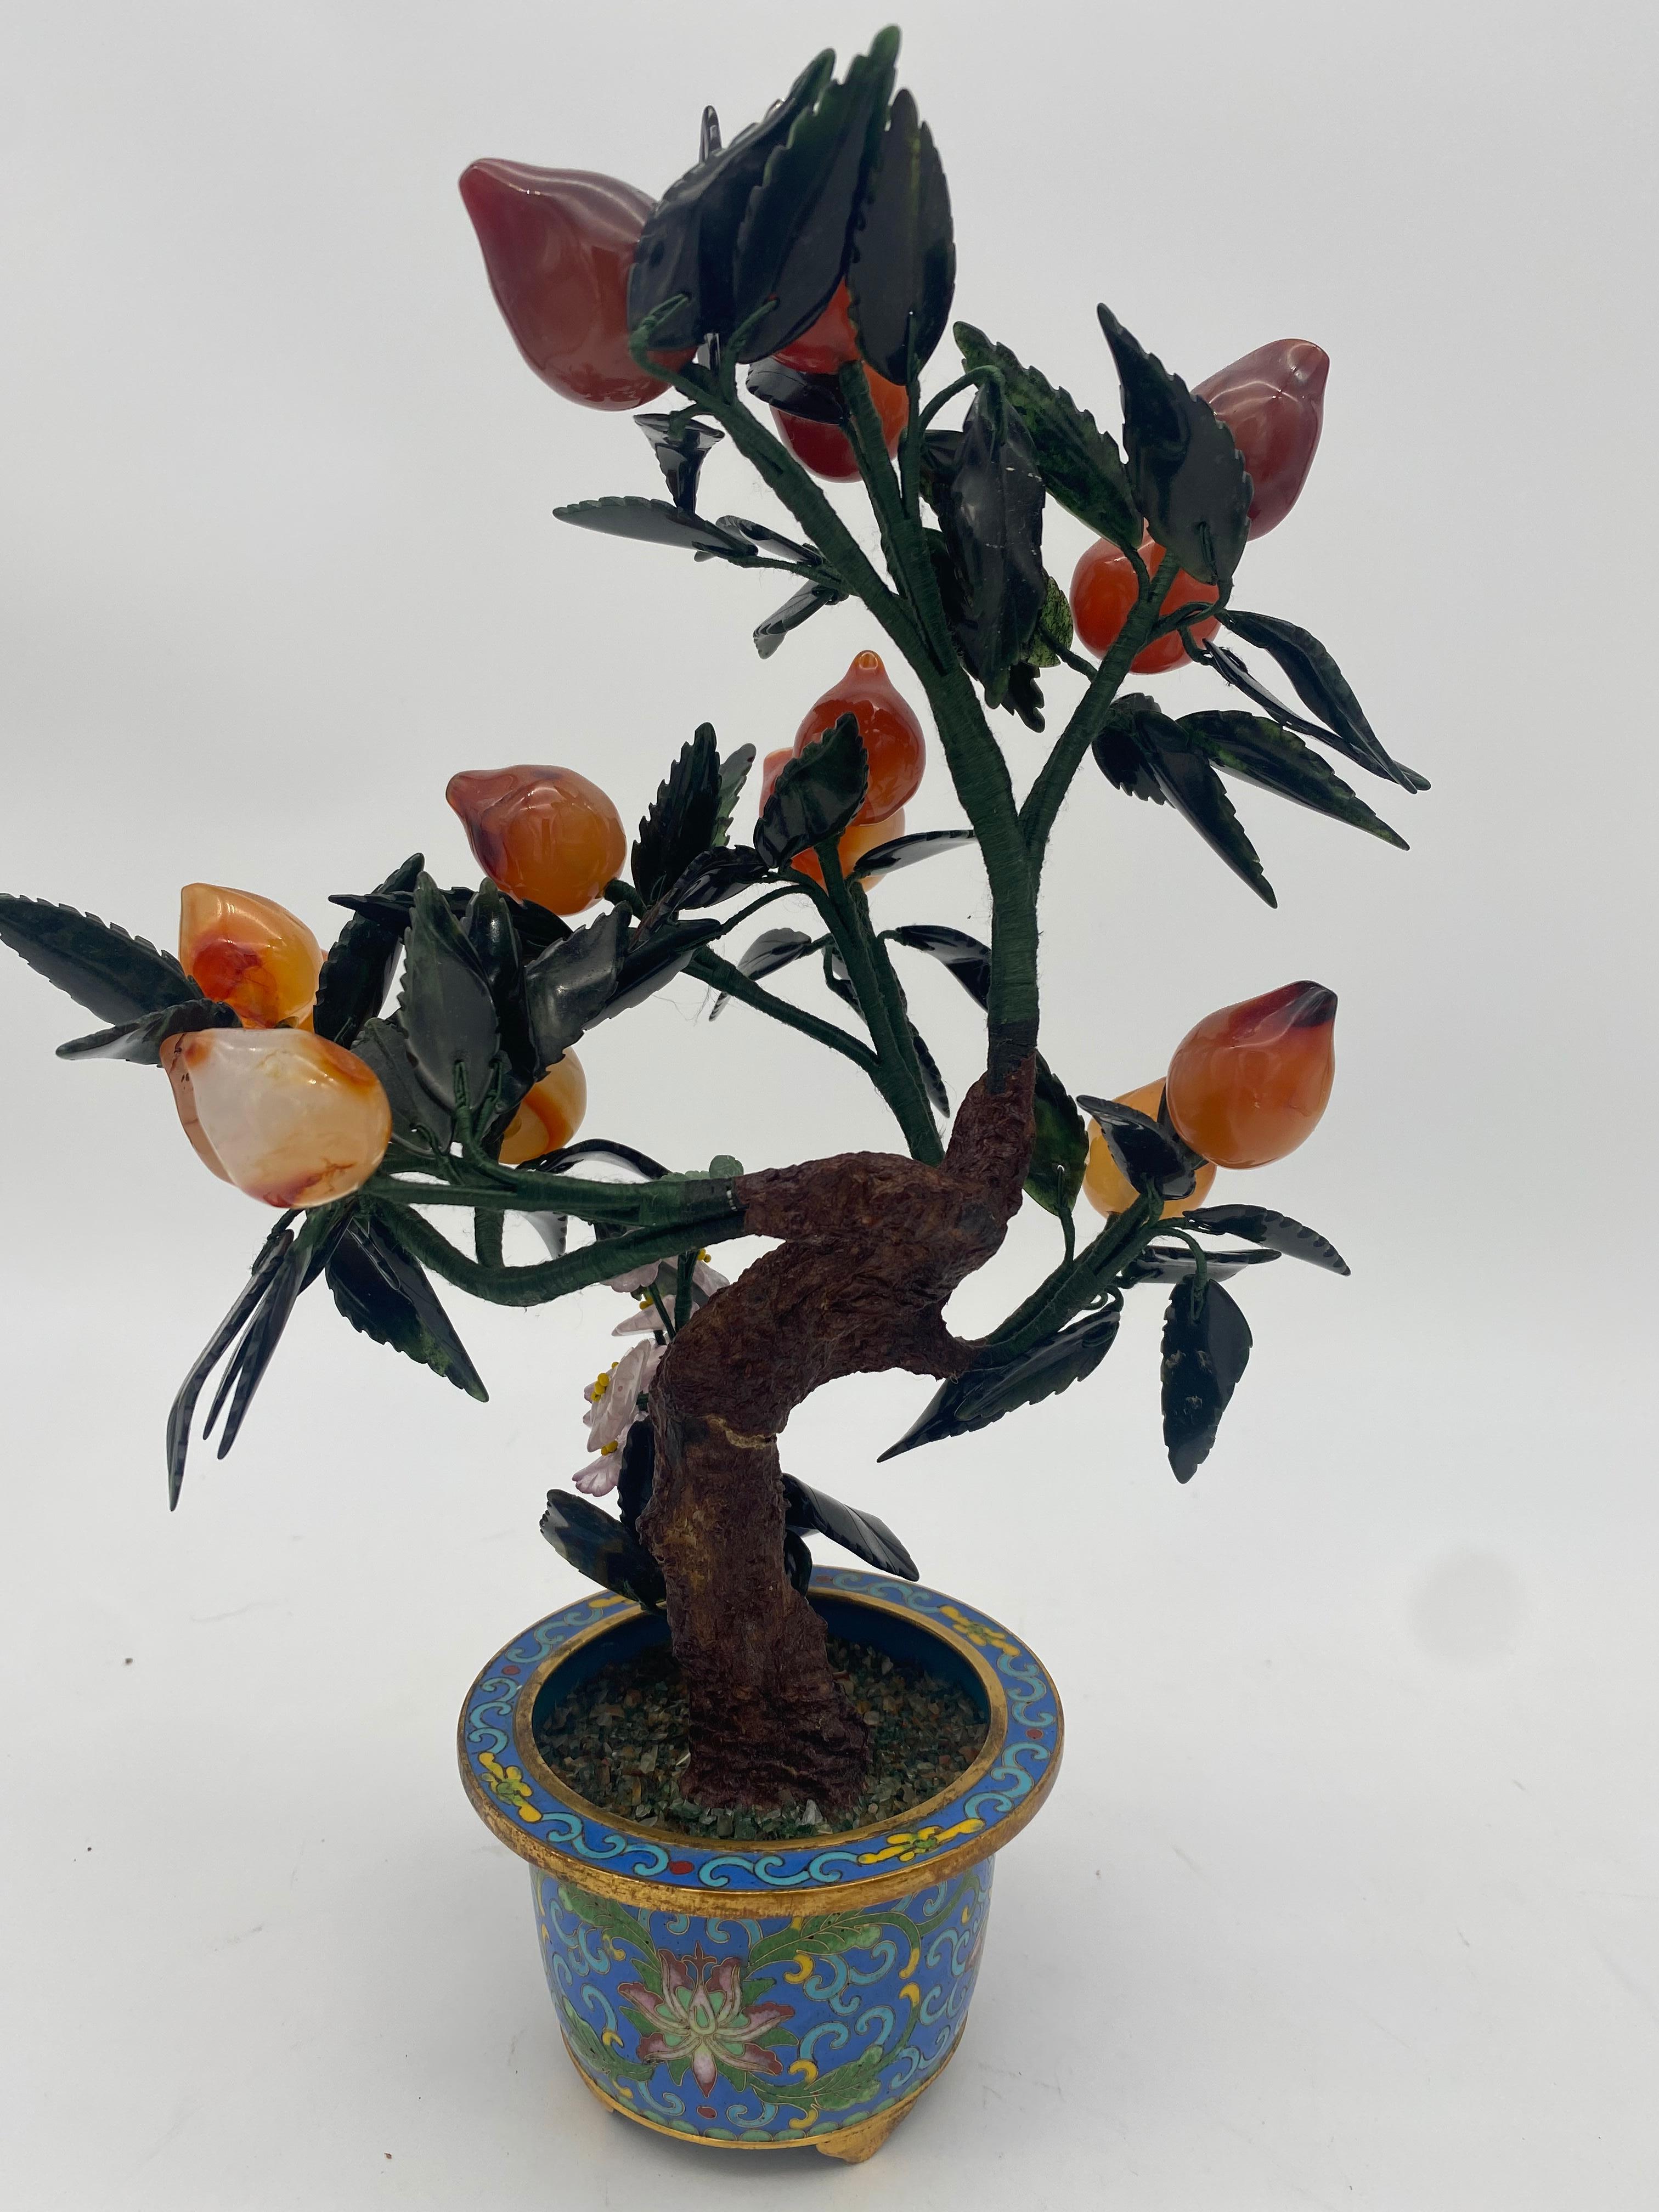 Carved Antique Chinese Bonsai Tree in Gilt Cloisonné Pot